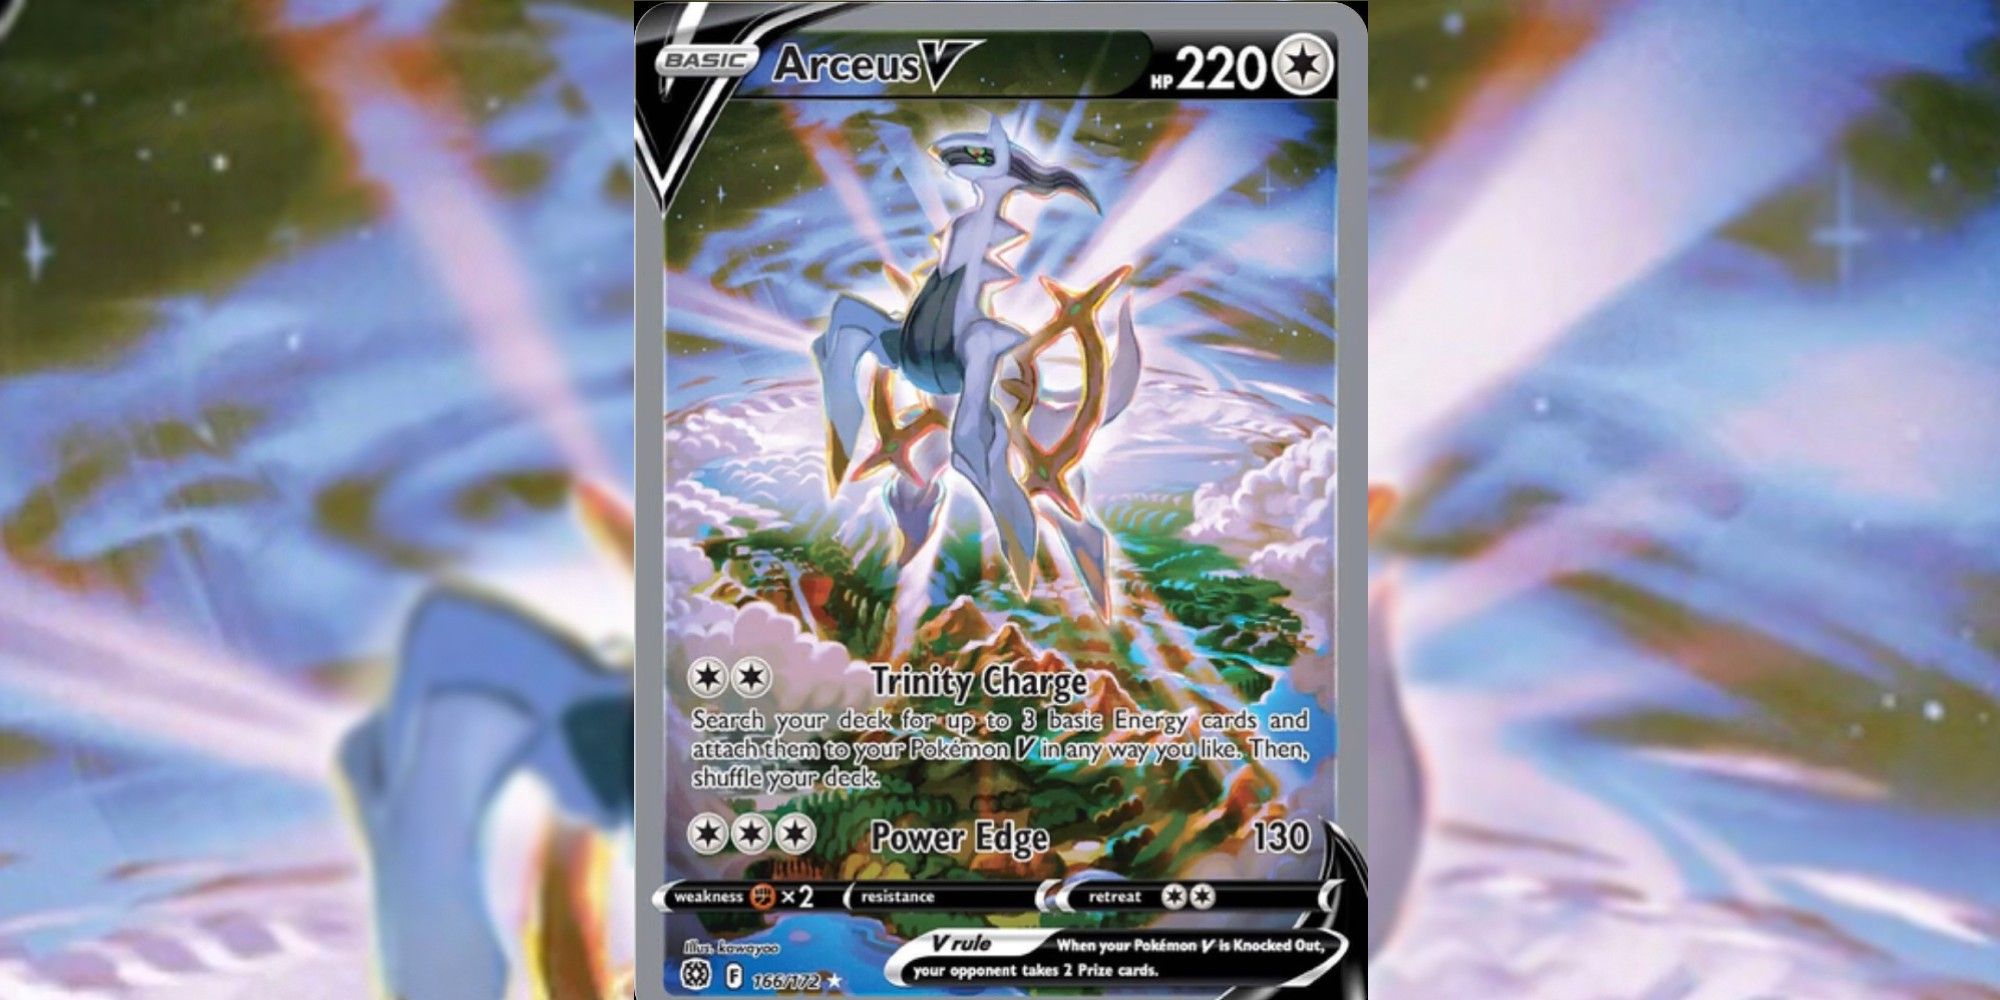 Arceus V card with blurred background